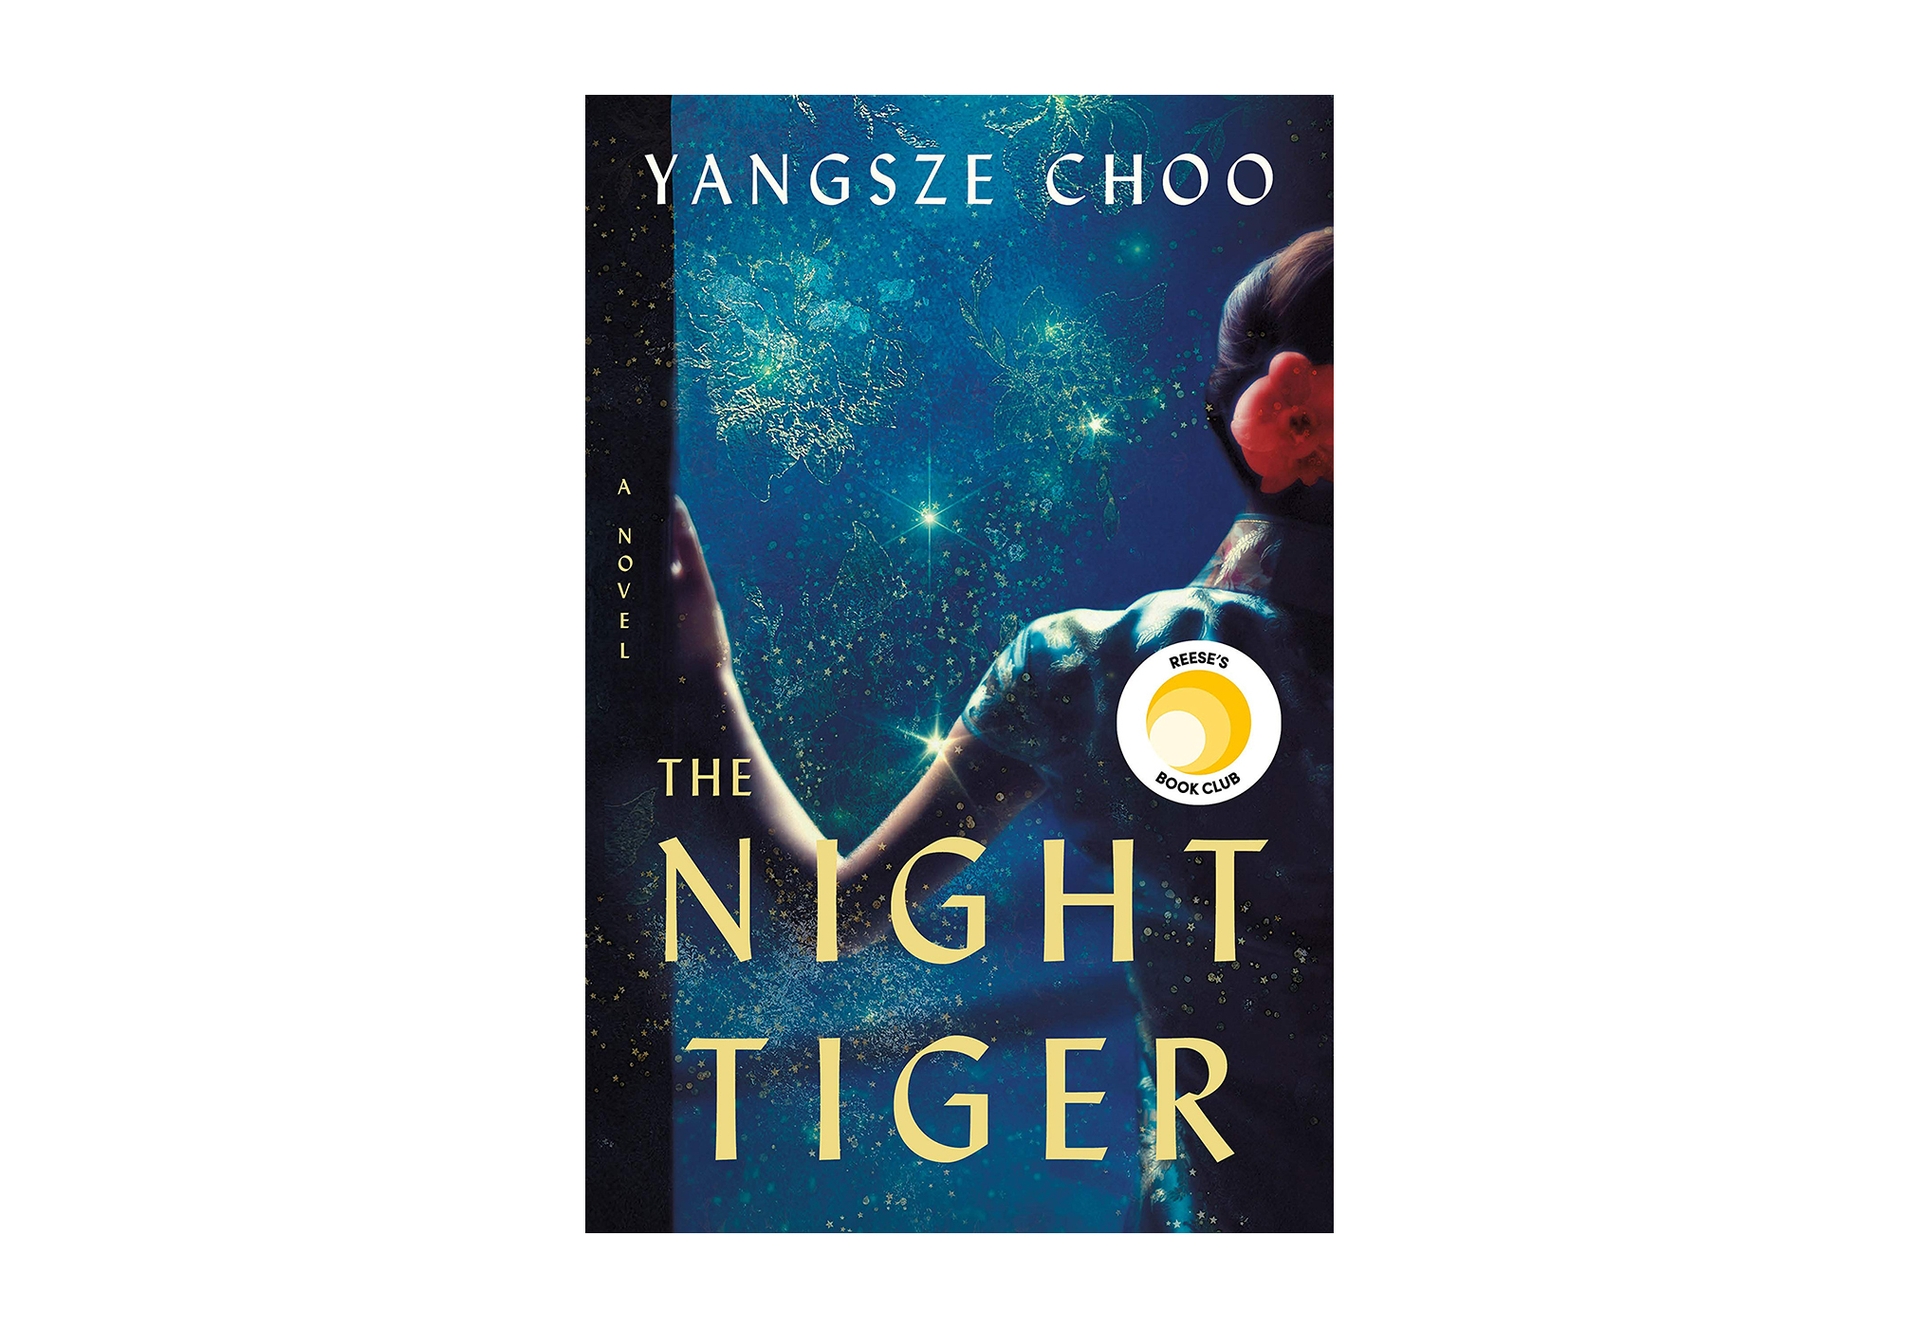 Book cover for "The Night Tiger" by Yangsze Choo, shows a woman leaning on a doorway, her arm bent as she leans, wearing a short-sleeved frock, with a flower in her tied-back hair. In front of her is a darkened blue landscape with flashes of light. 